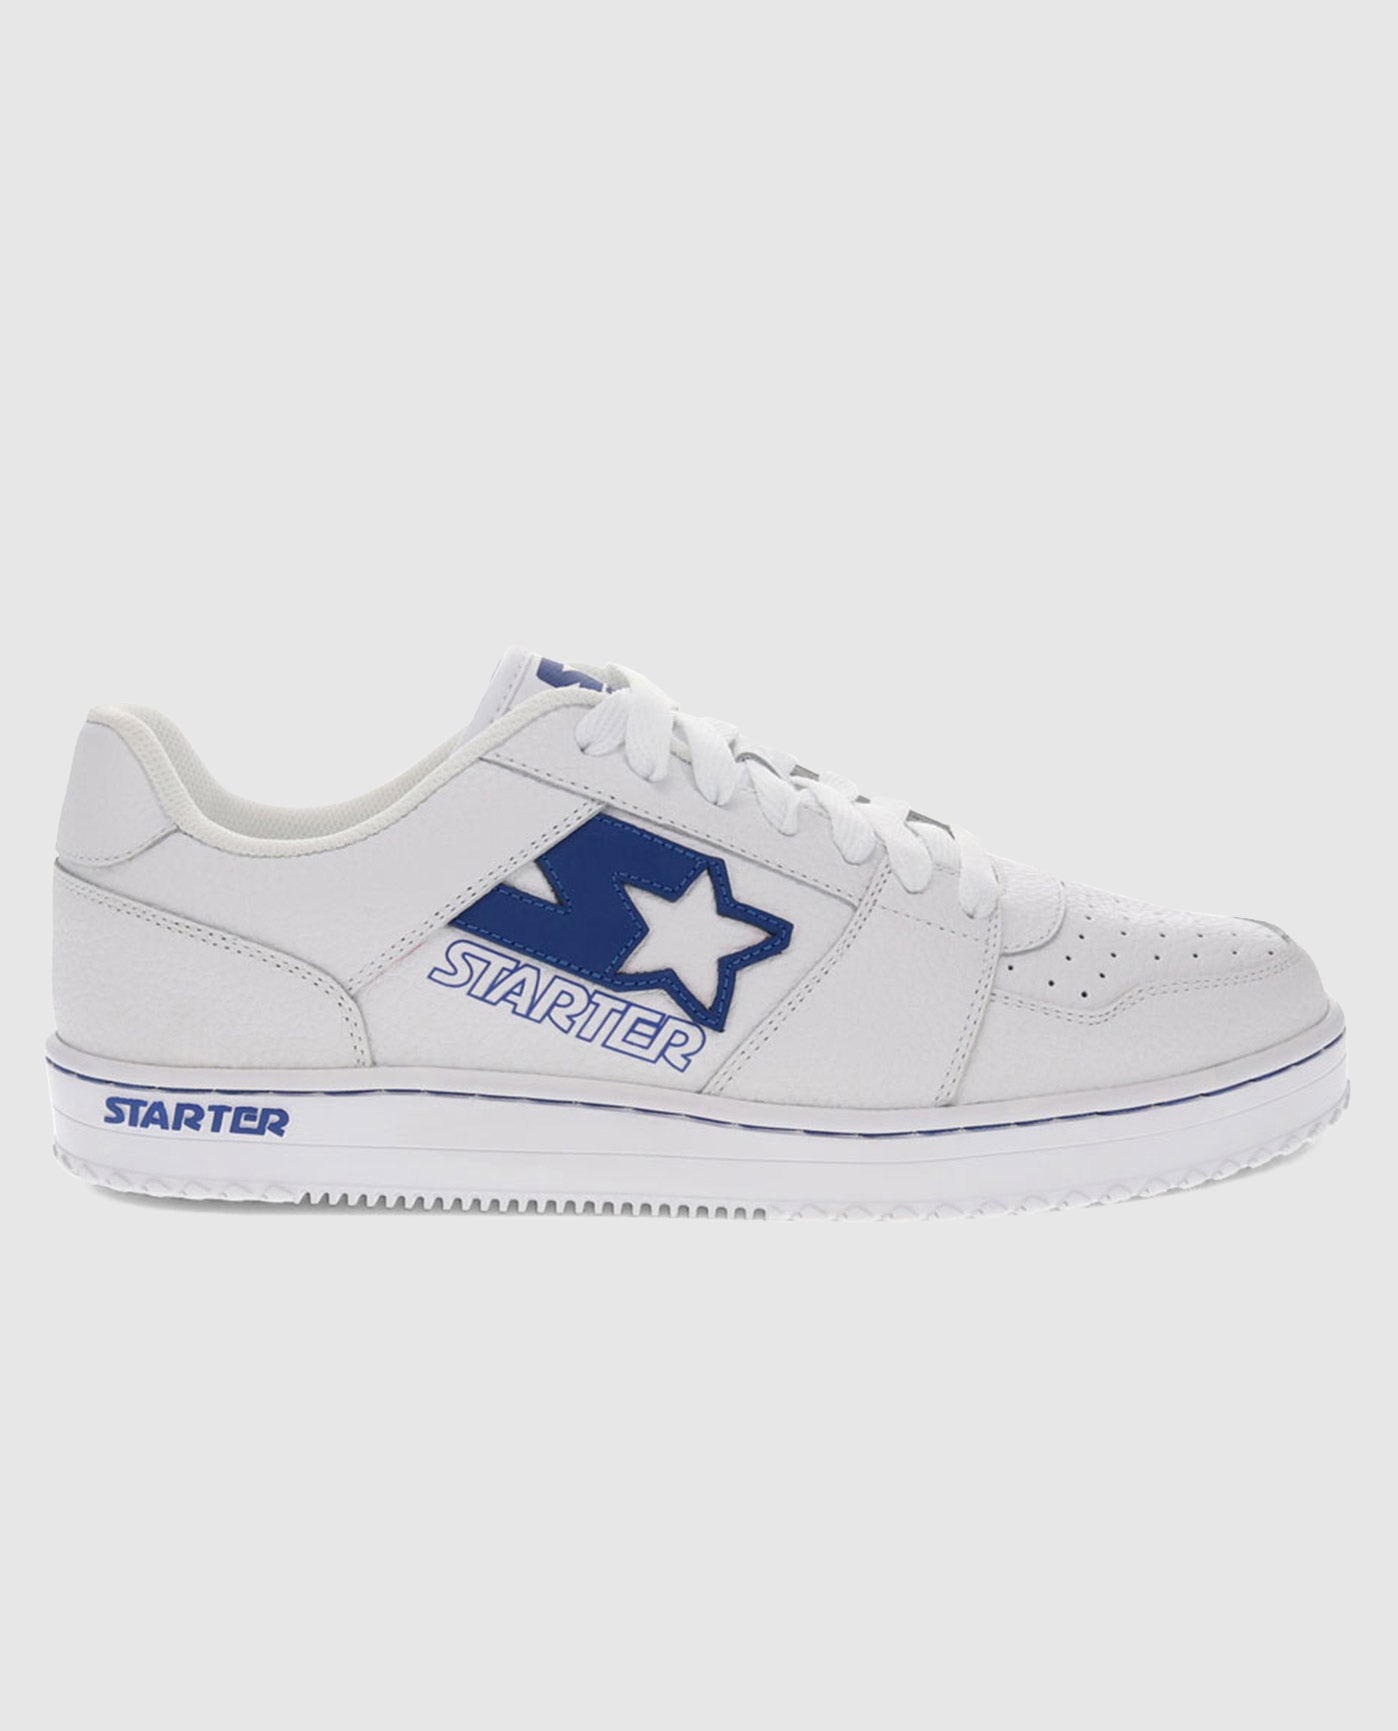 Outside Side View of Blue and White Starter LFS 1 Sneaker | Blue White